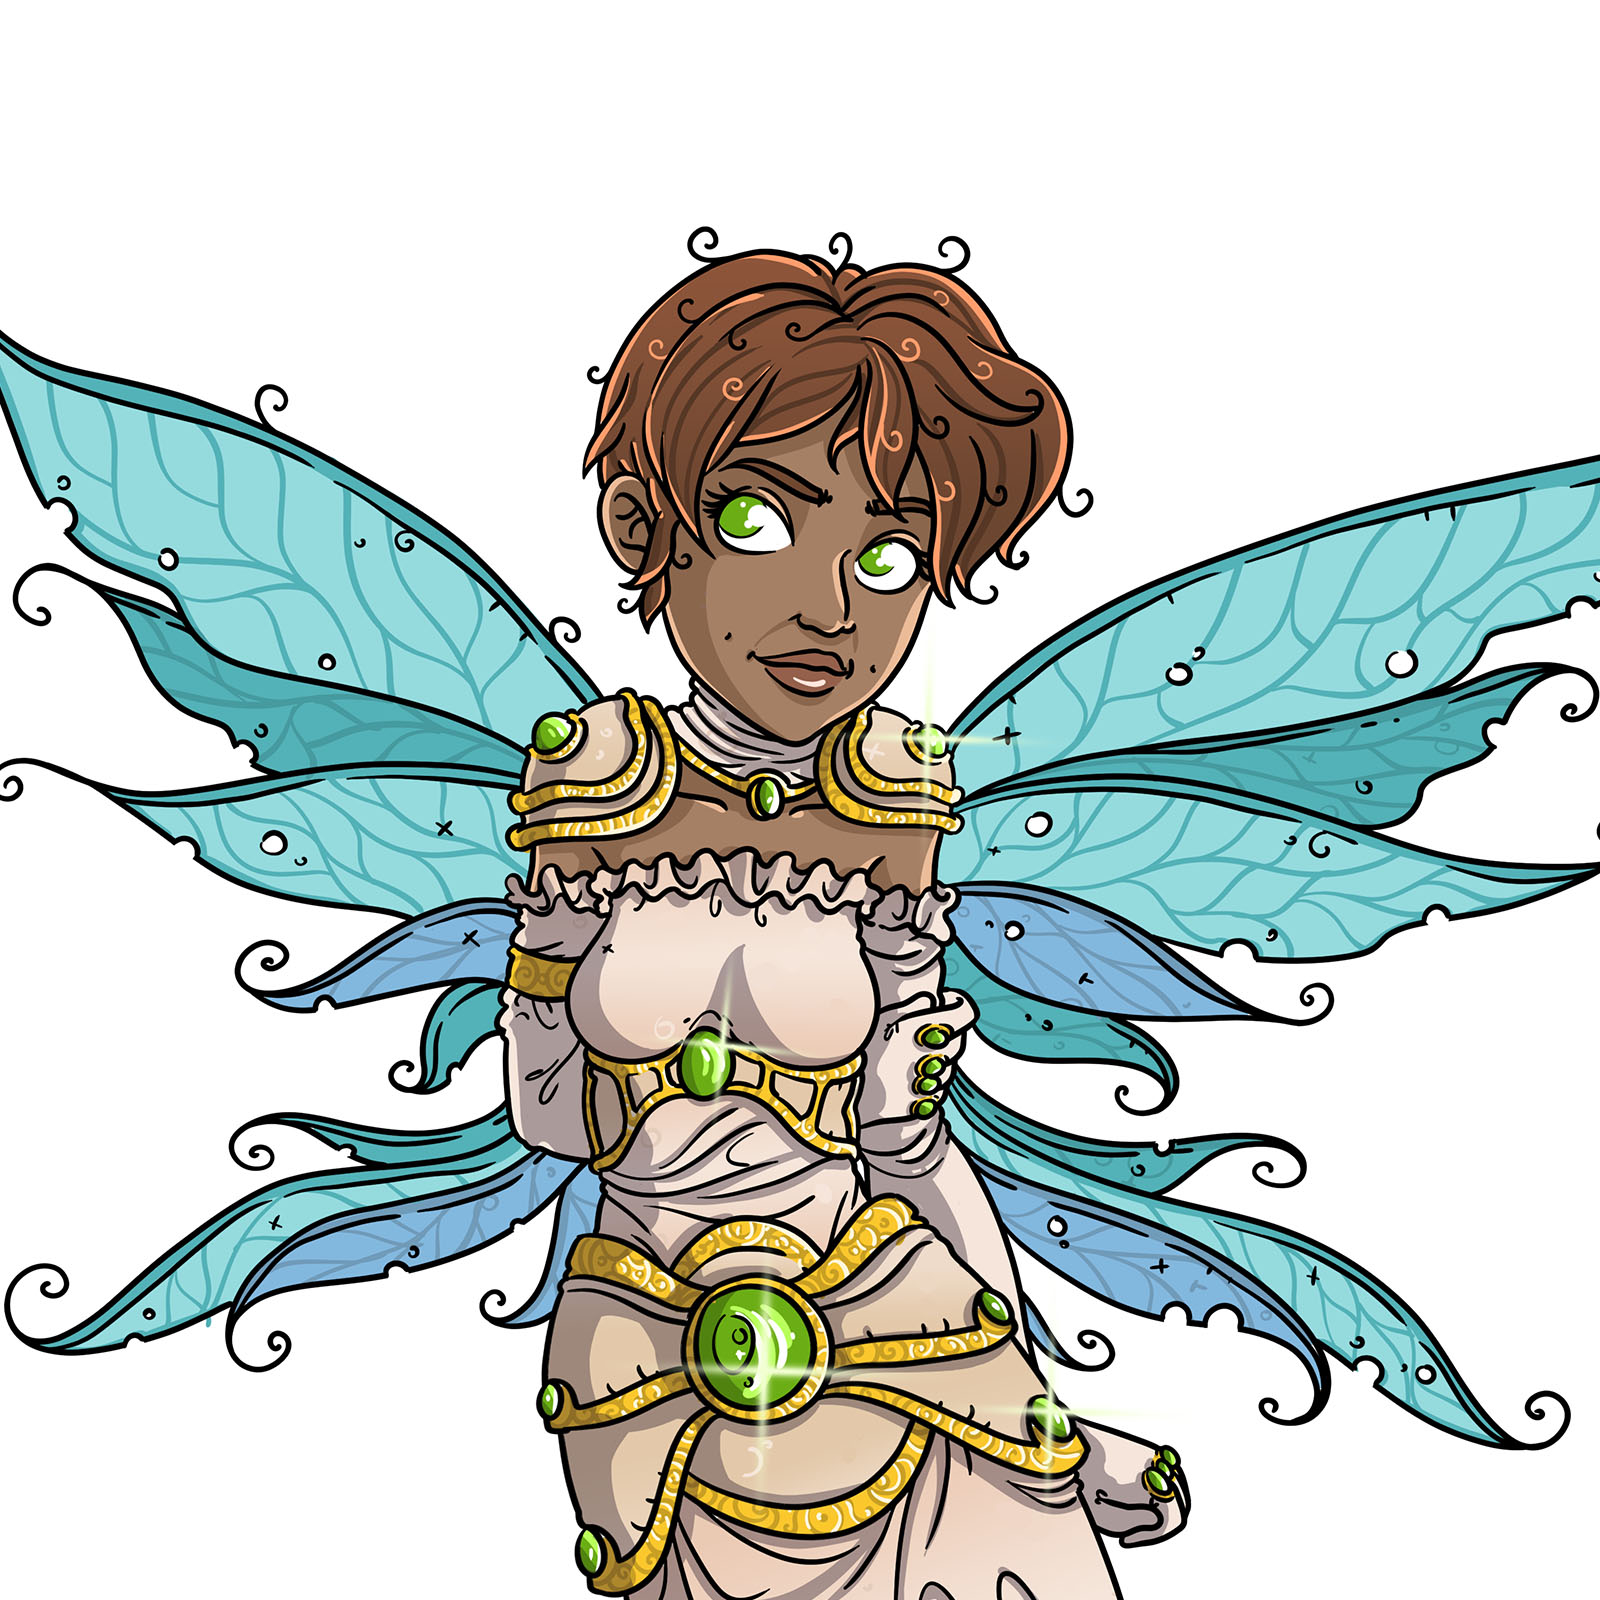 Potential Character - Naughty Fairy